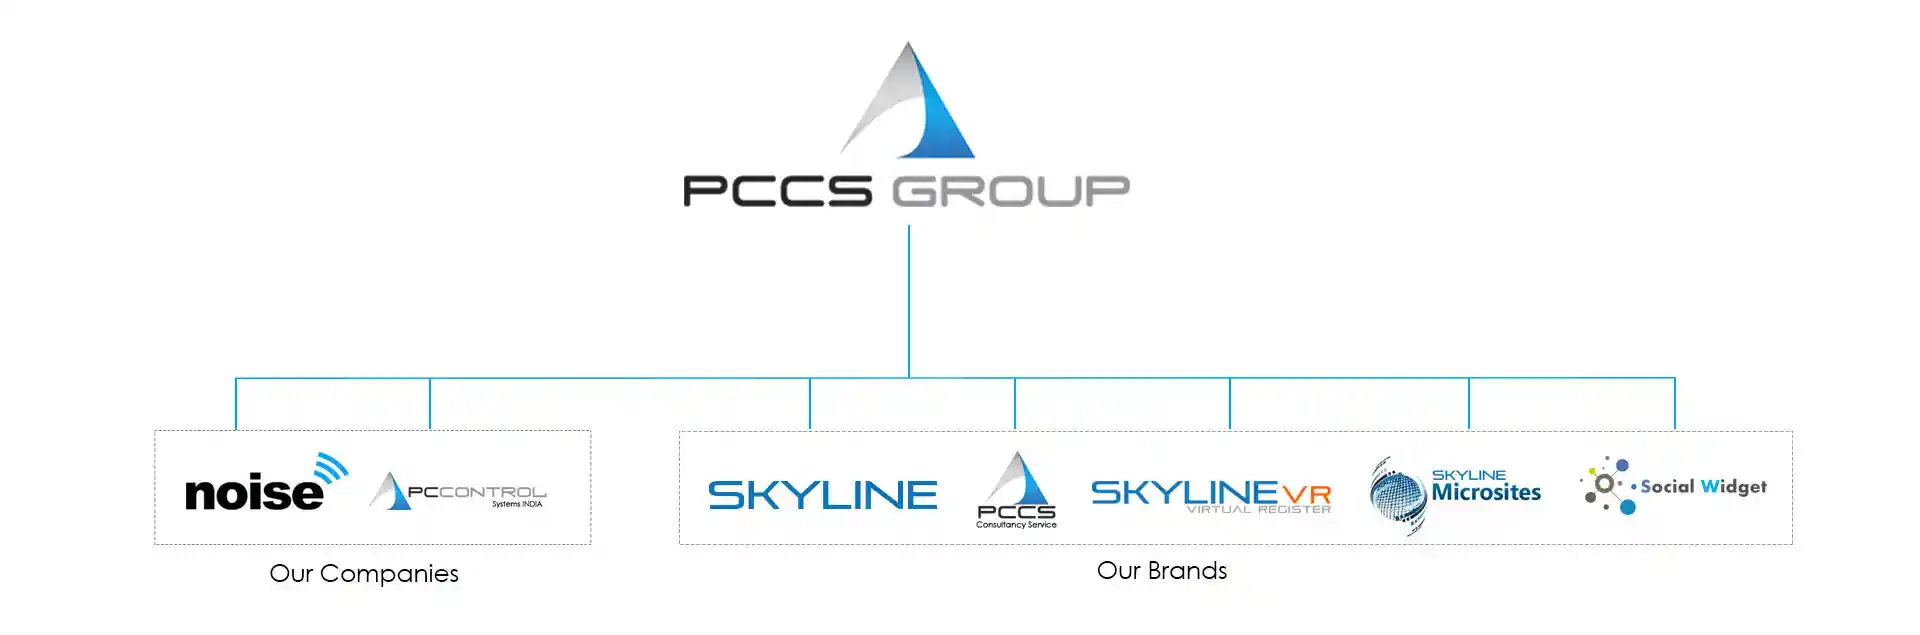 New Corporate Structure Pccs Group Optimized